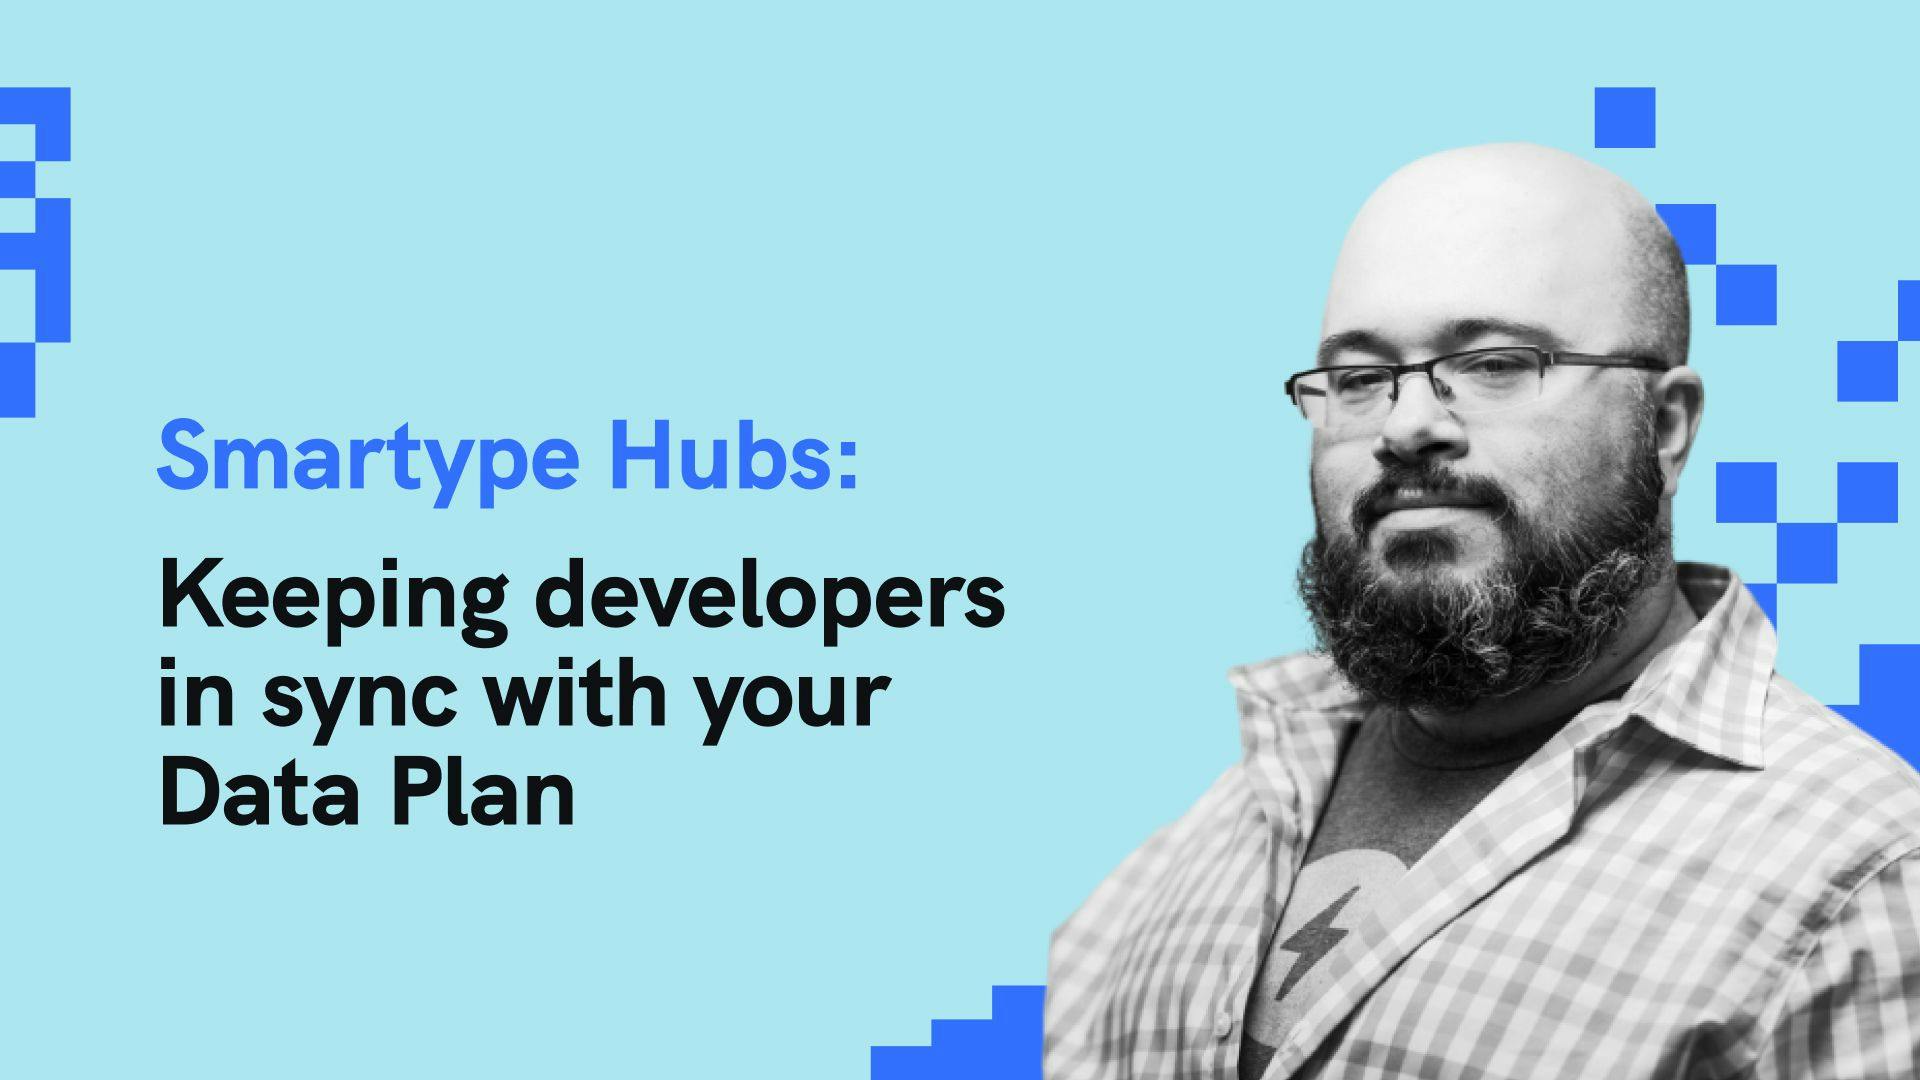 /smartype-hubs-keeping-developers-in-sync-with-your-data-plan feature image